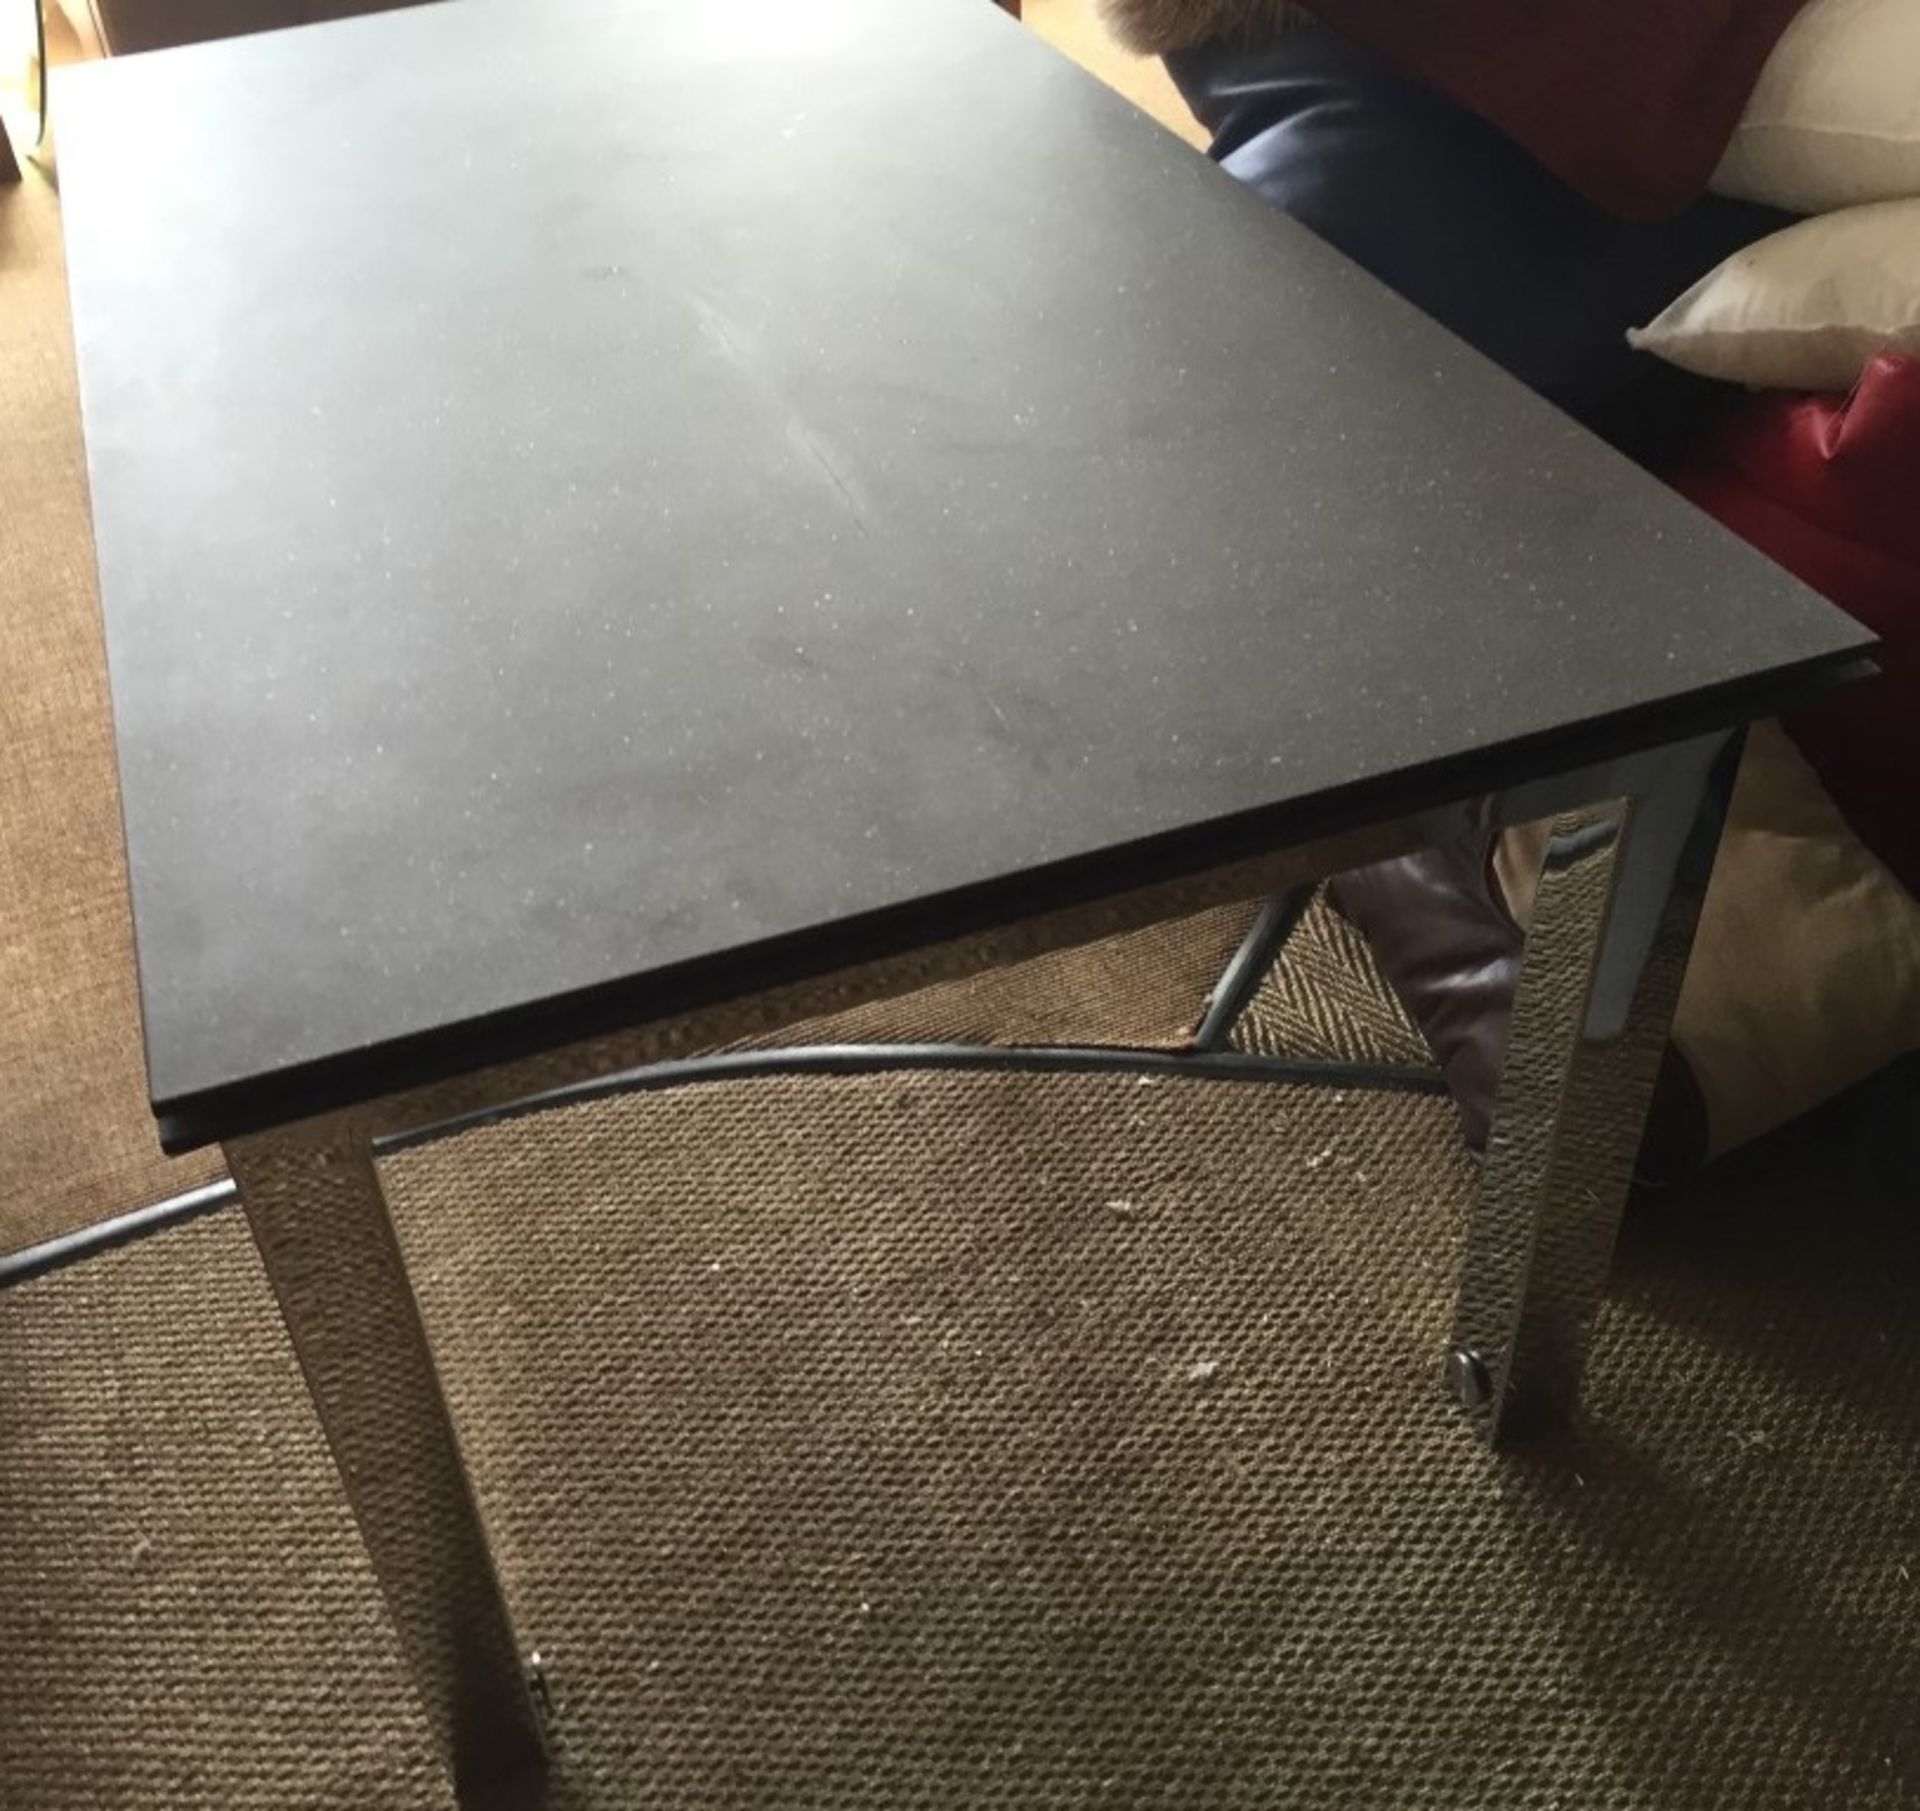 1 x Designer Granite Effect Extending Table - Easily Adjustable, With A sturdy Metal Frame With An